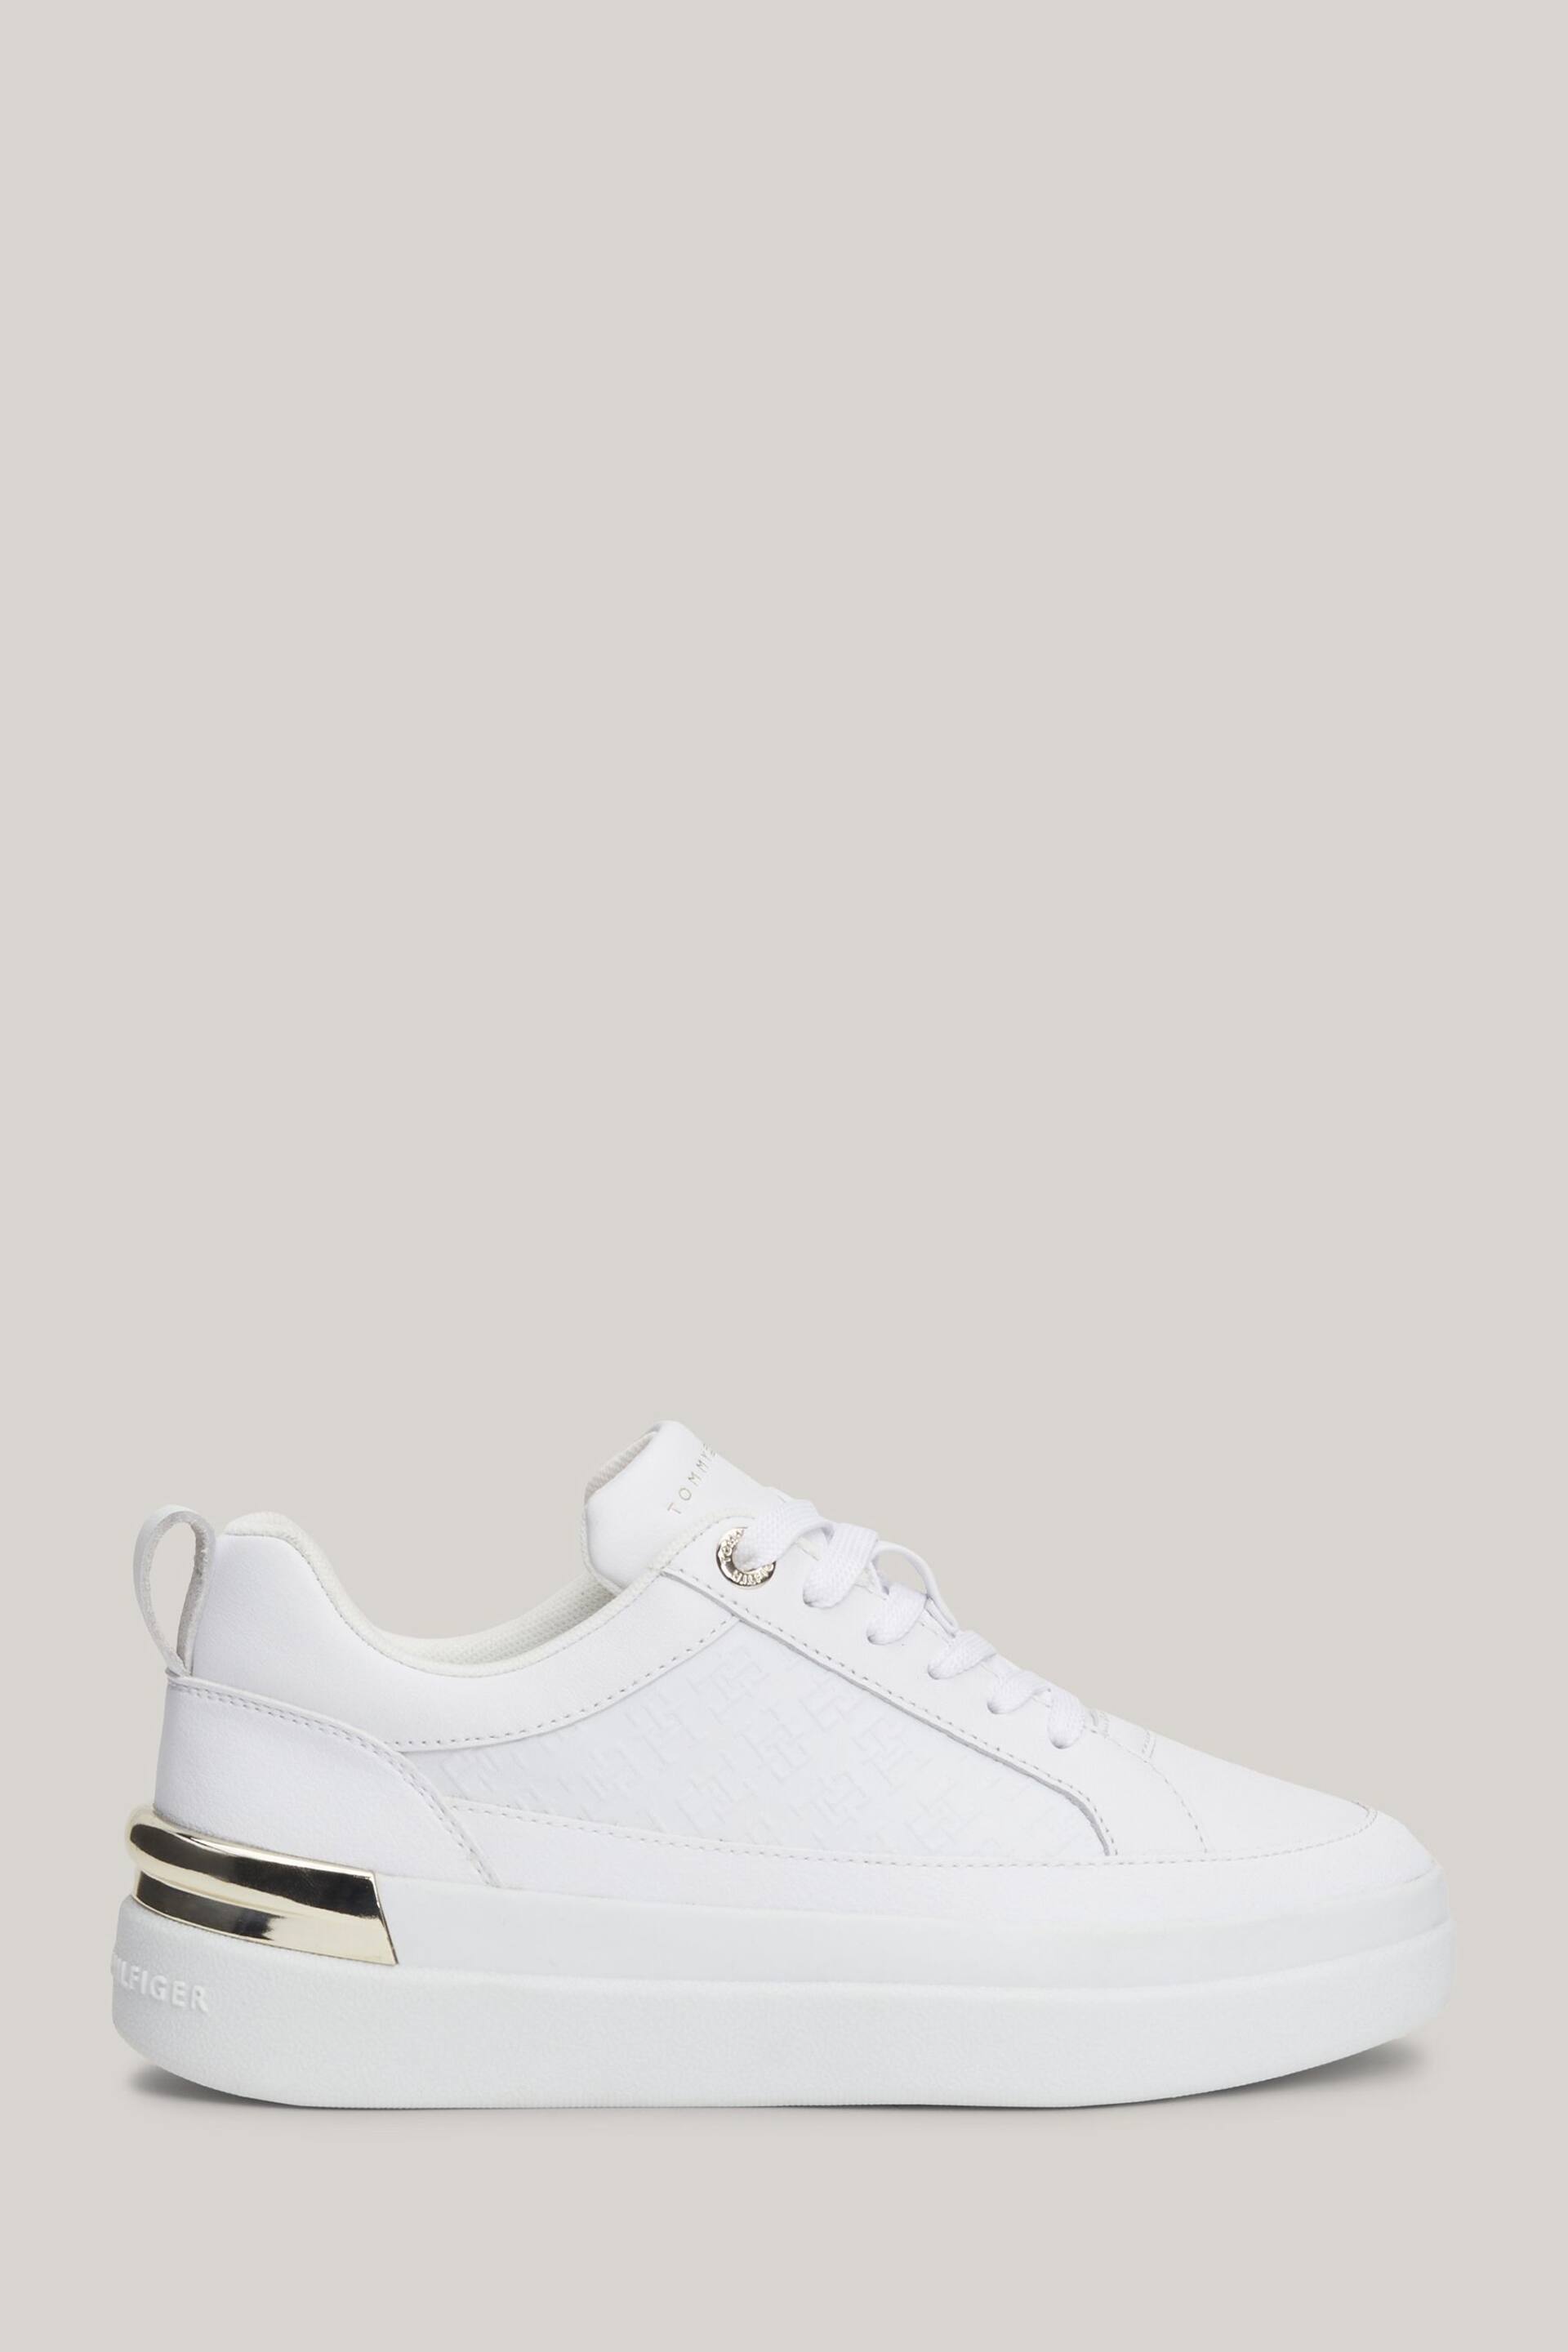 Tommy Hilfiger Lux Court White Sneakers - Image 1 of 5